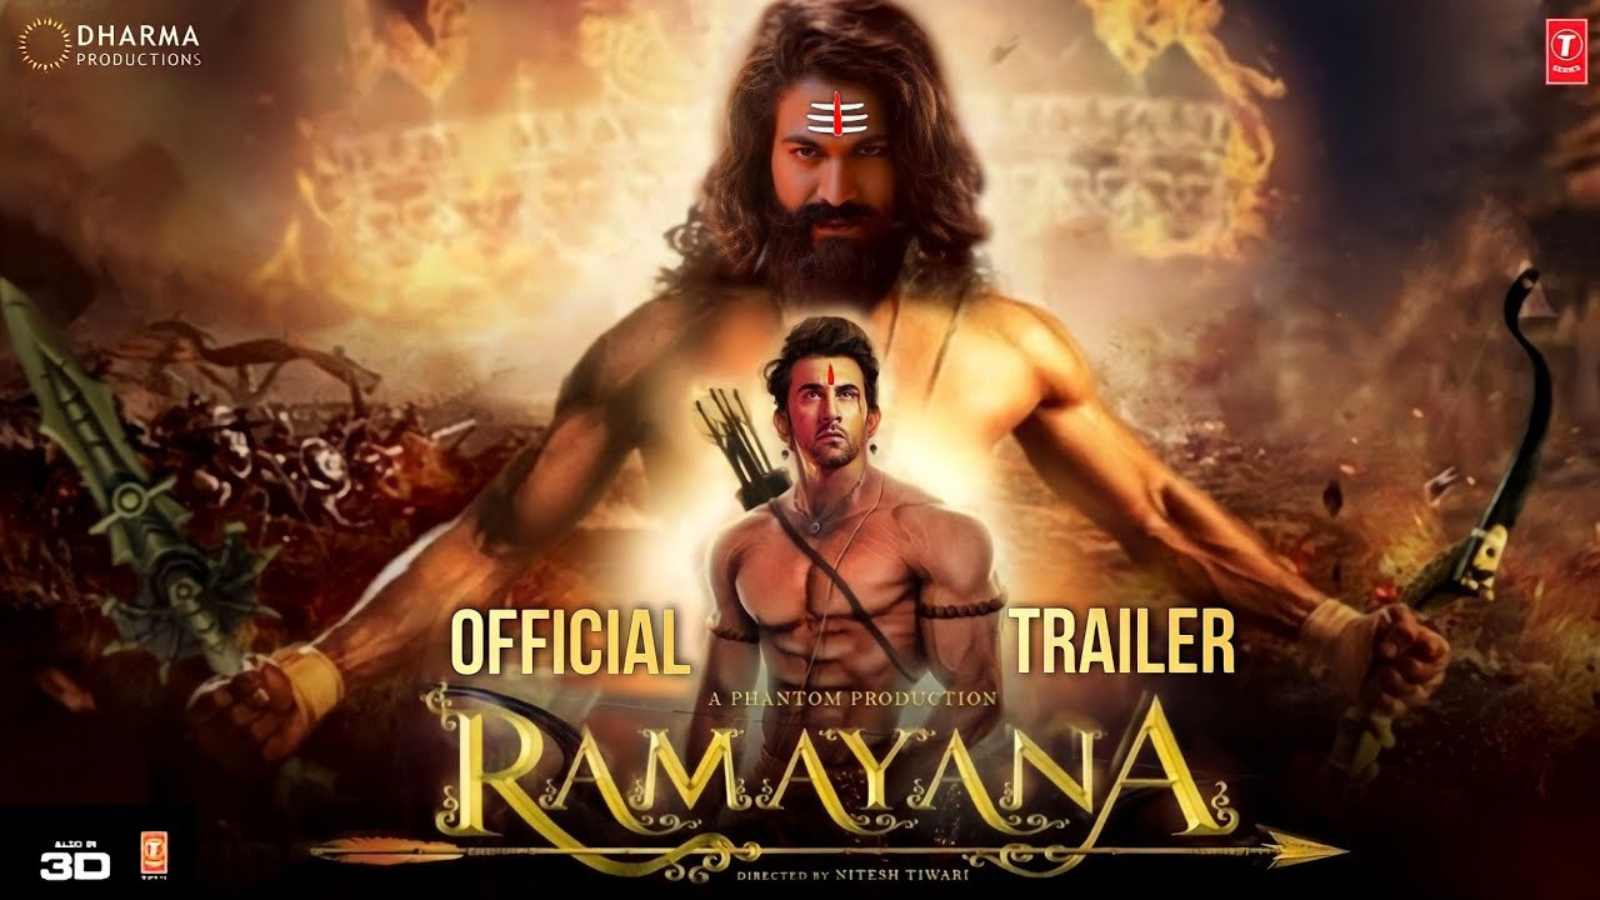 Ramayana 2025 Movie Cast, Release Date and More Details